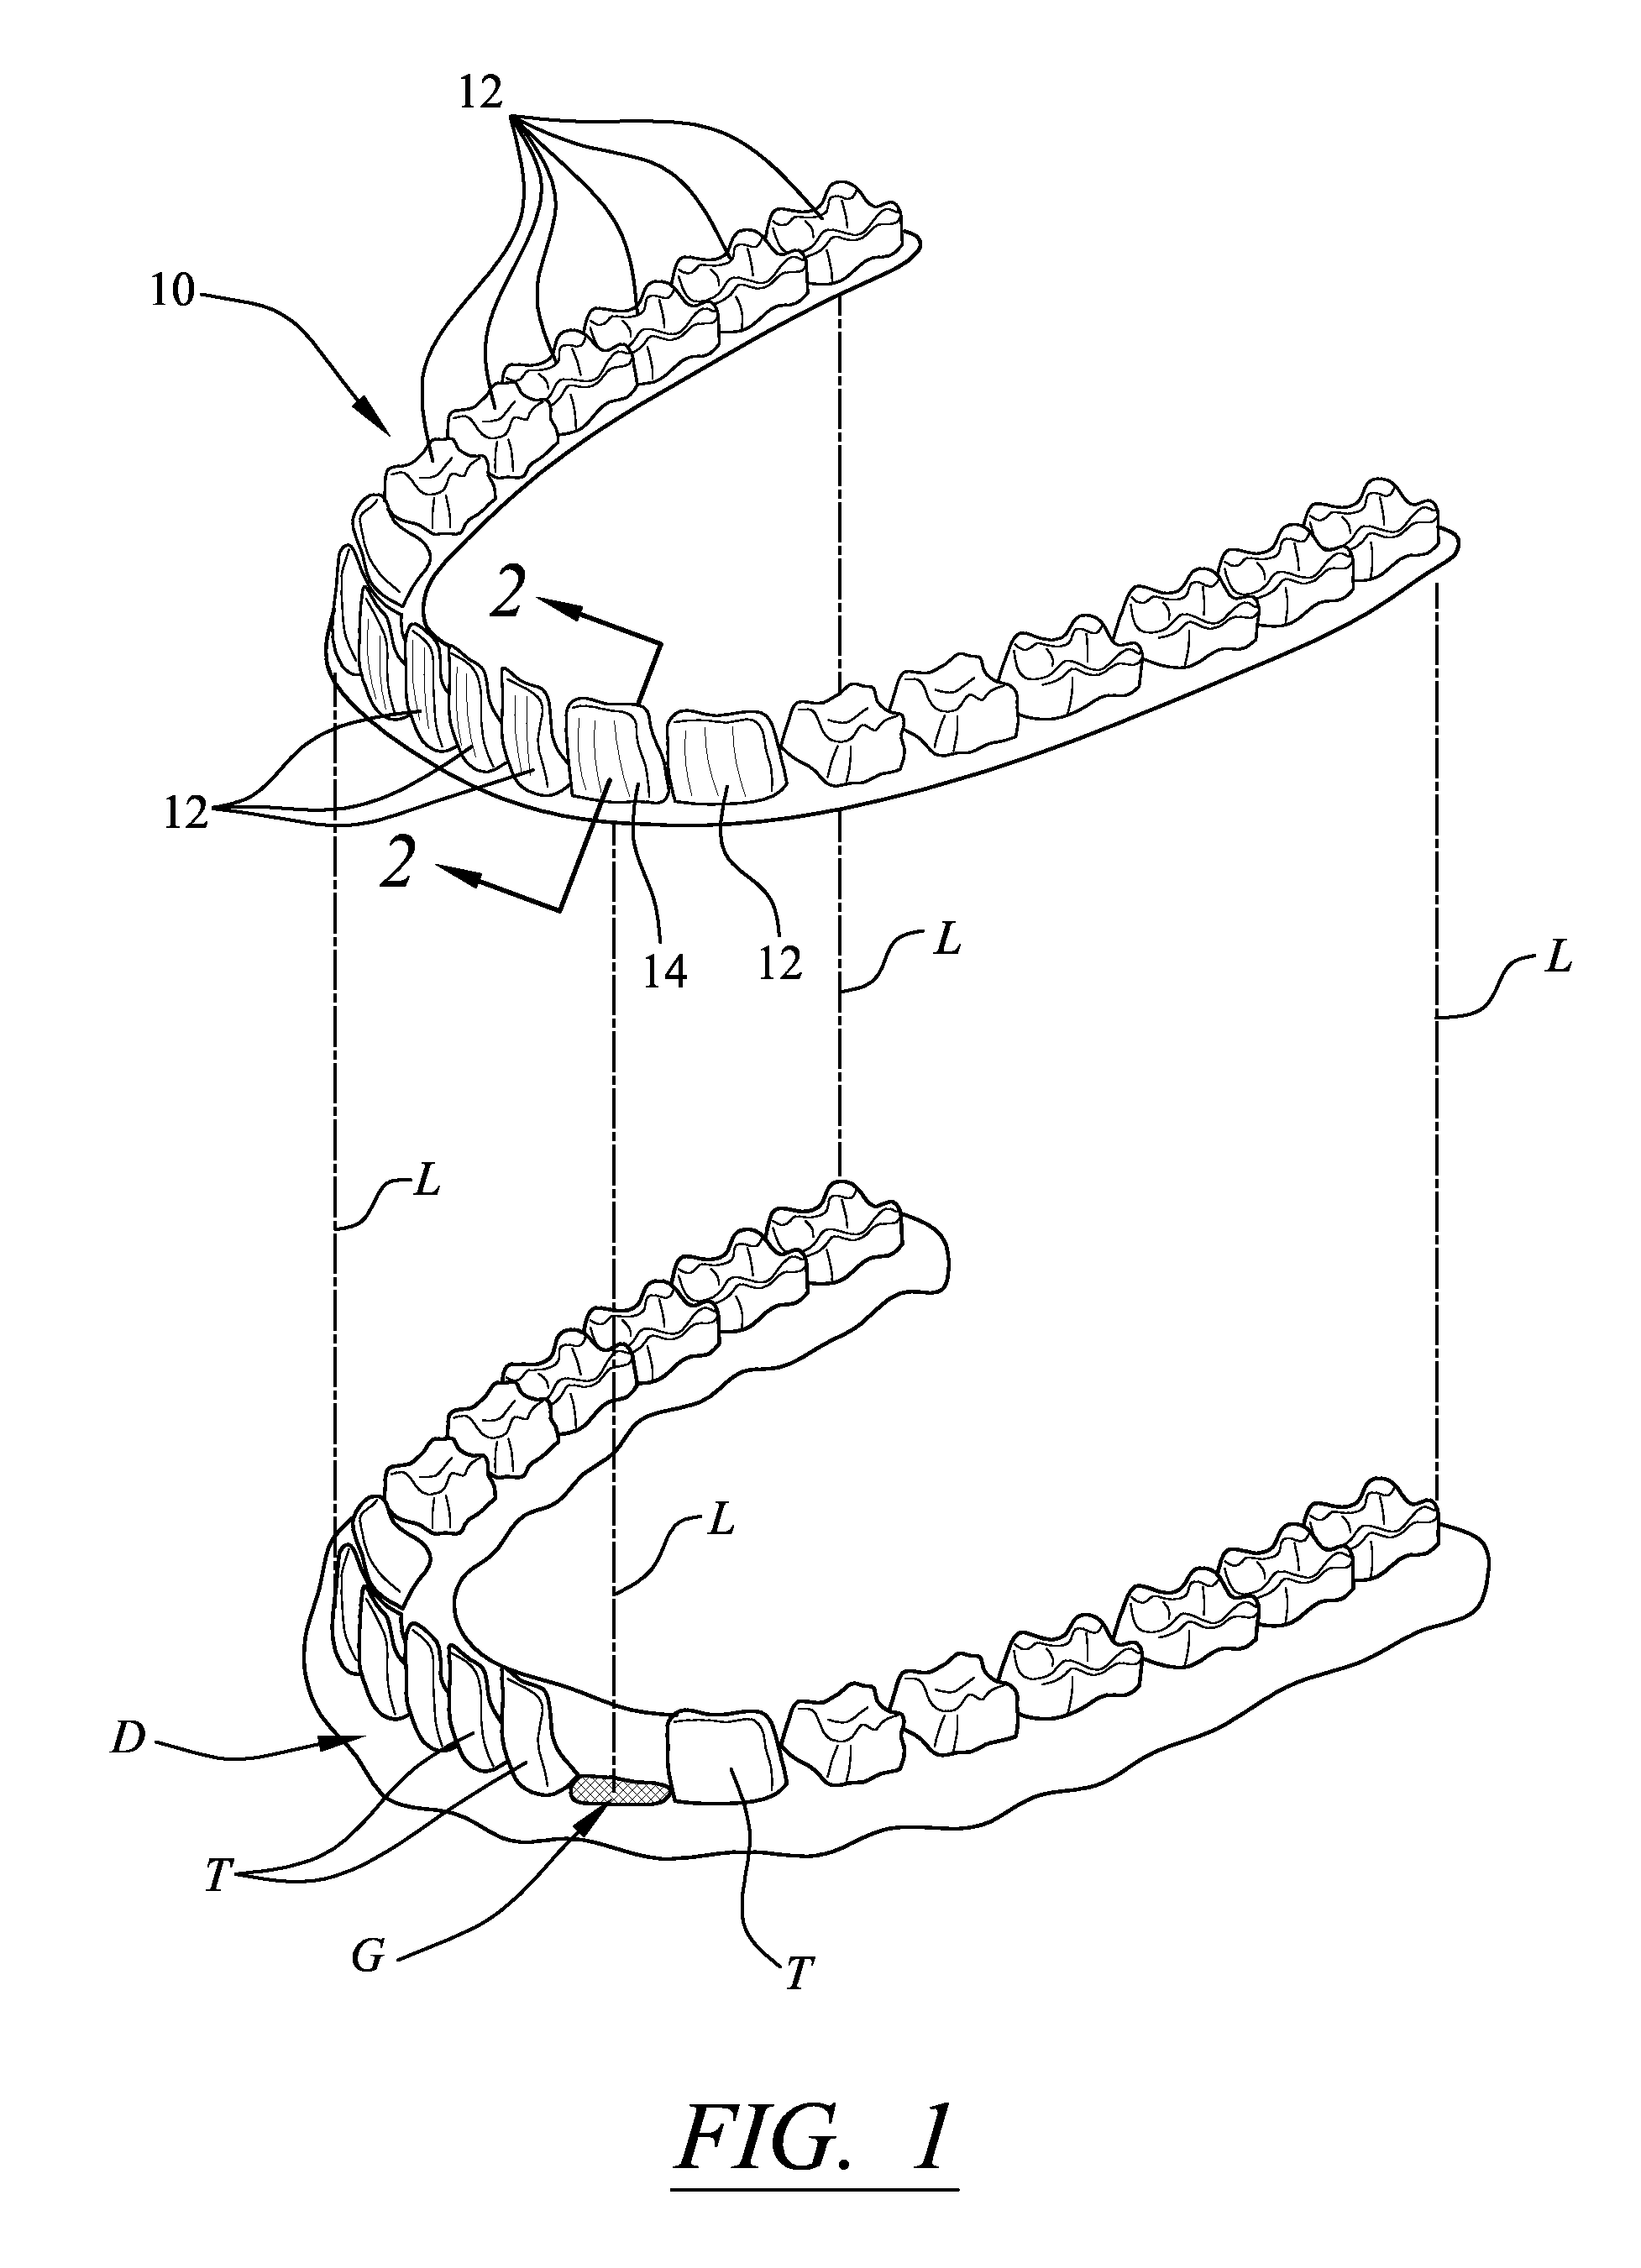 Enhancement to dental alignment device